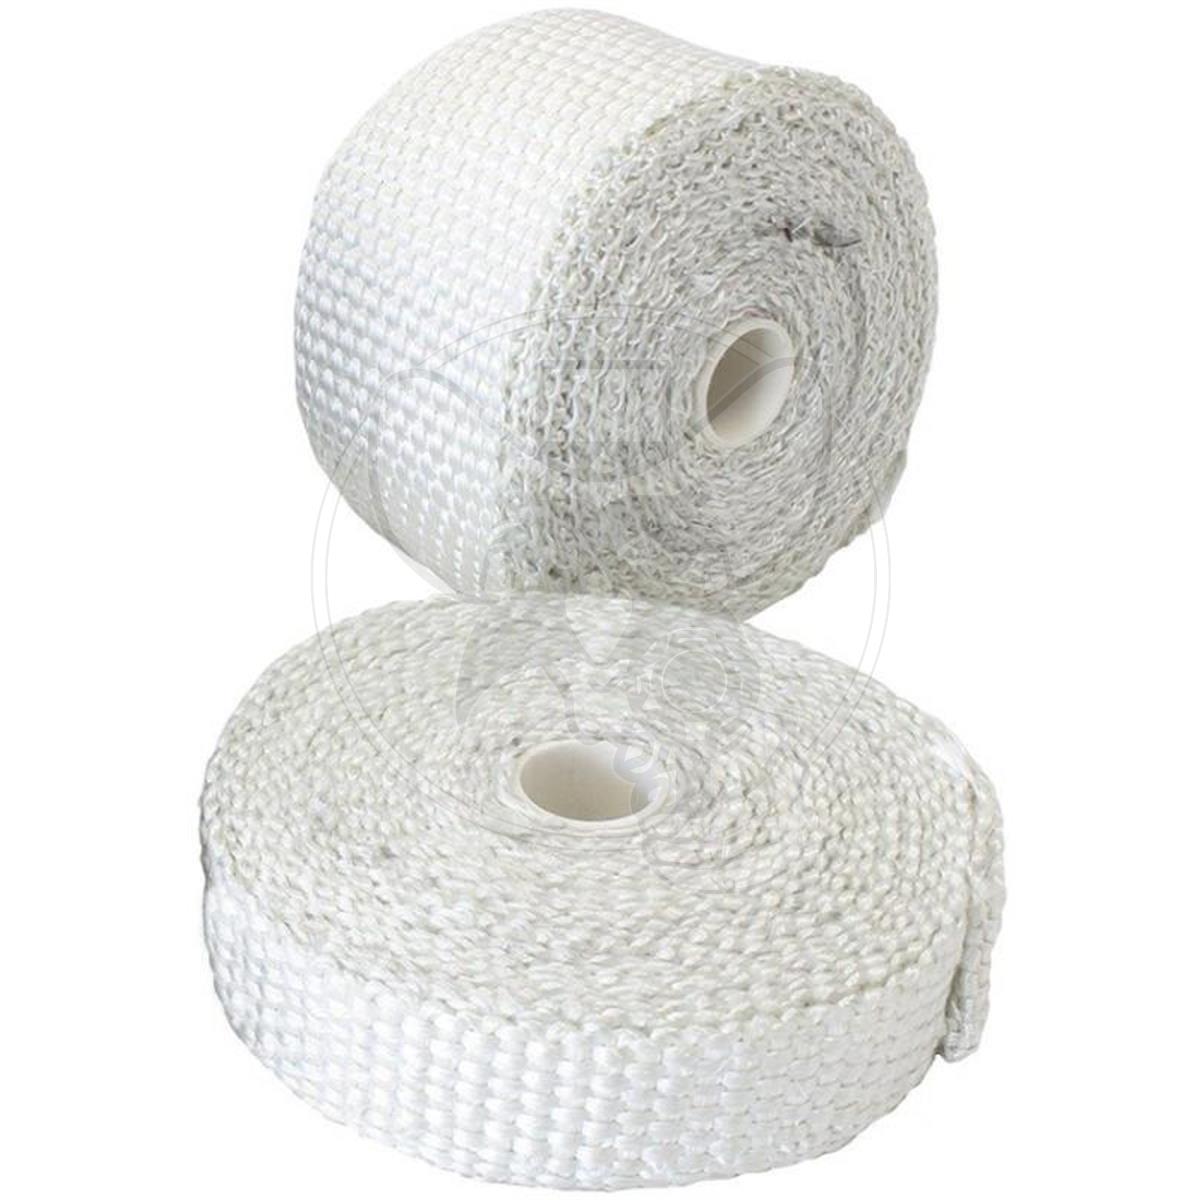 AEROFLOW EXHAUST INSULATION WRAP 1" WIDE X 50FT LONG ROLL - WHITE